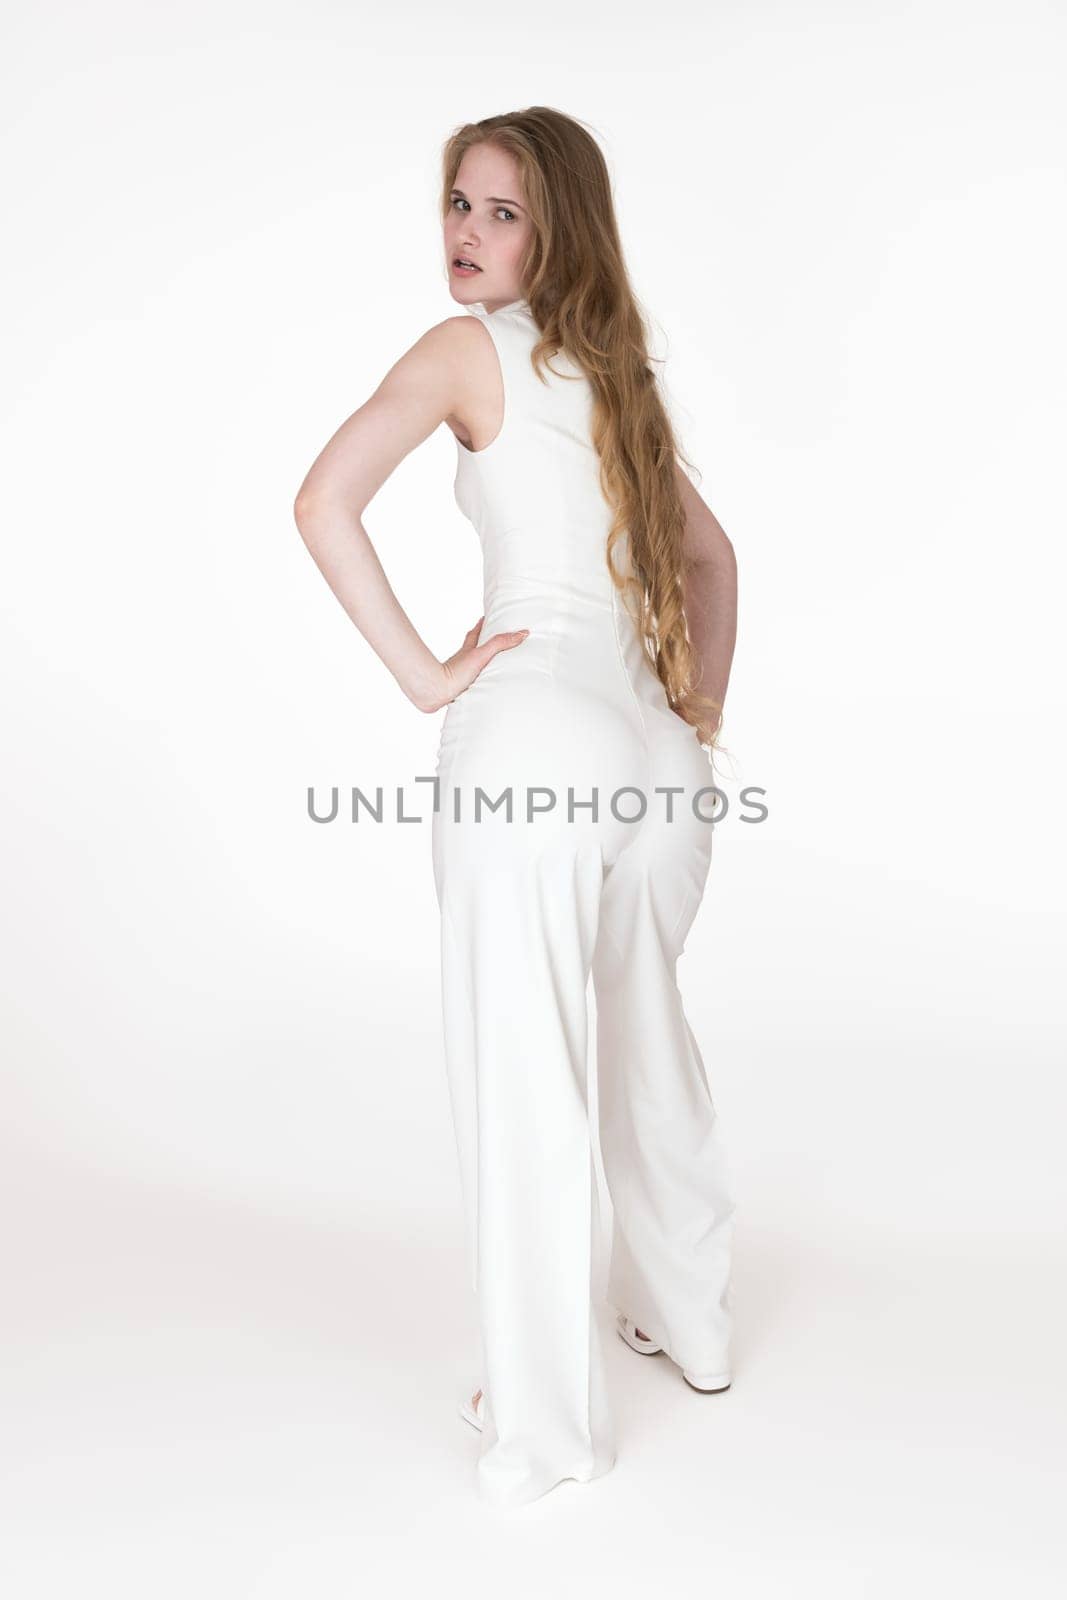 Back view woman looking over shoulder at camera dressed in white long jumpsuit, standing arms akimbo by Alexander-Piragis